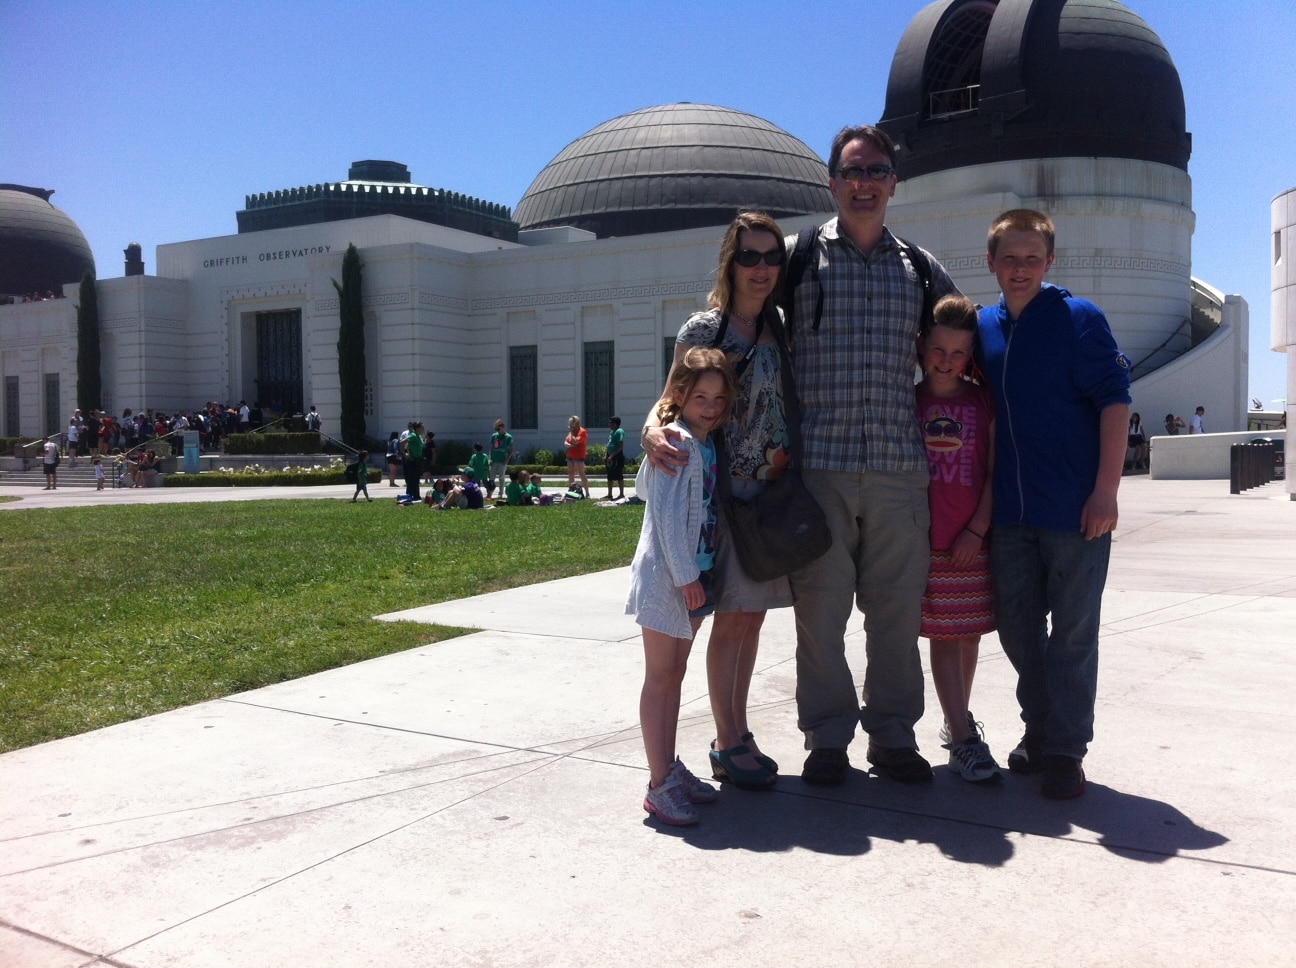 Griffith Observatory family